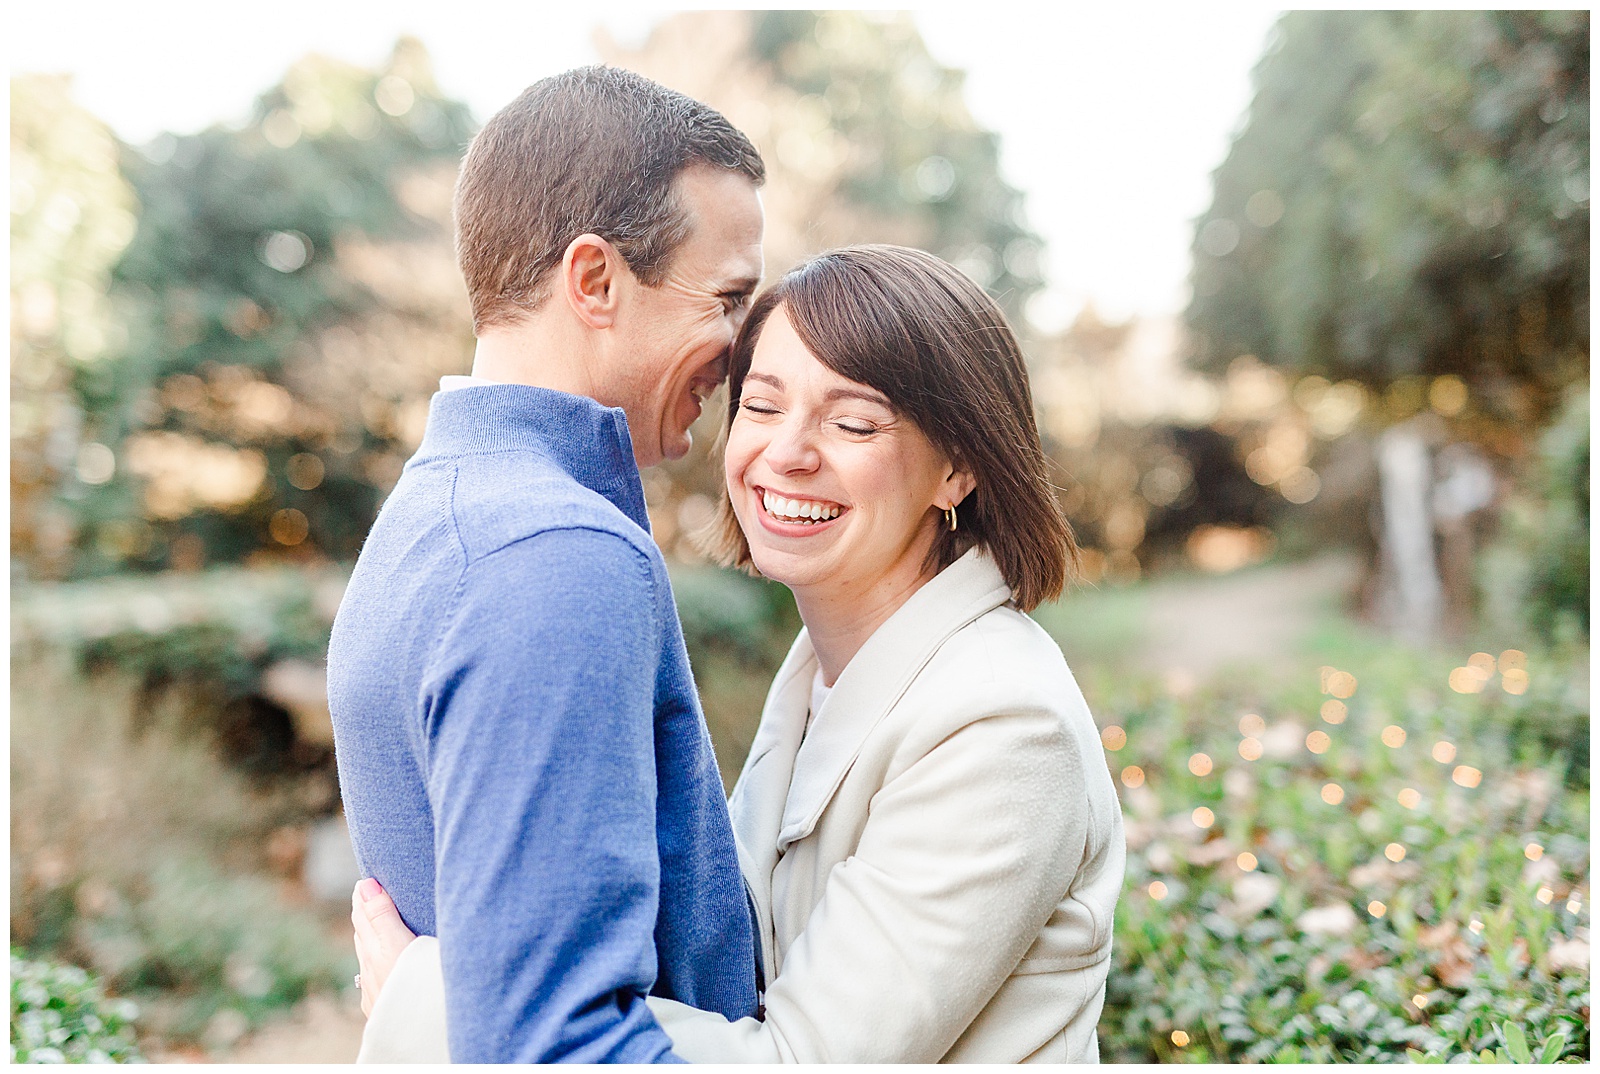 Sweet Couple Laughing in Park at Outdoor Winter Engagement Session in NC - white coat, short brown hair bride outfit ideas